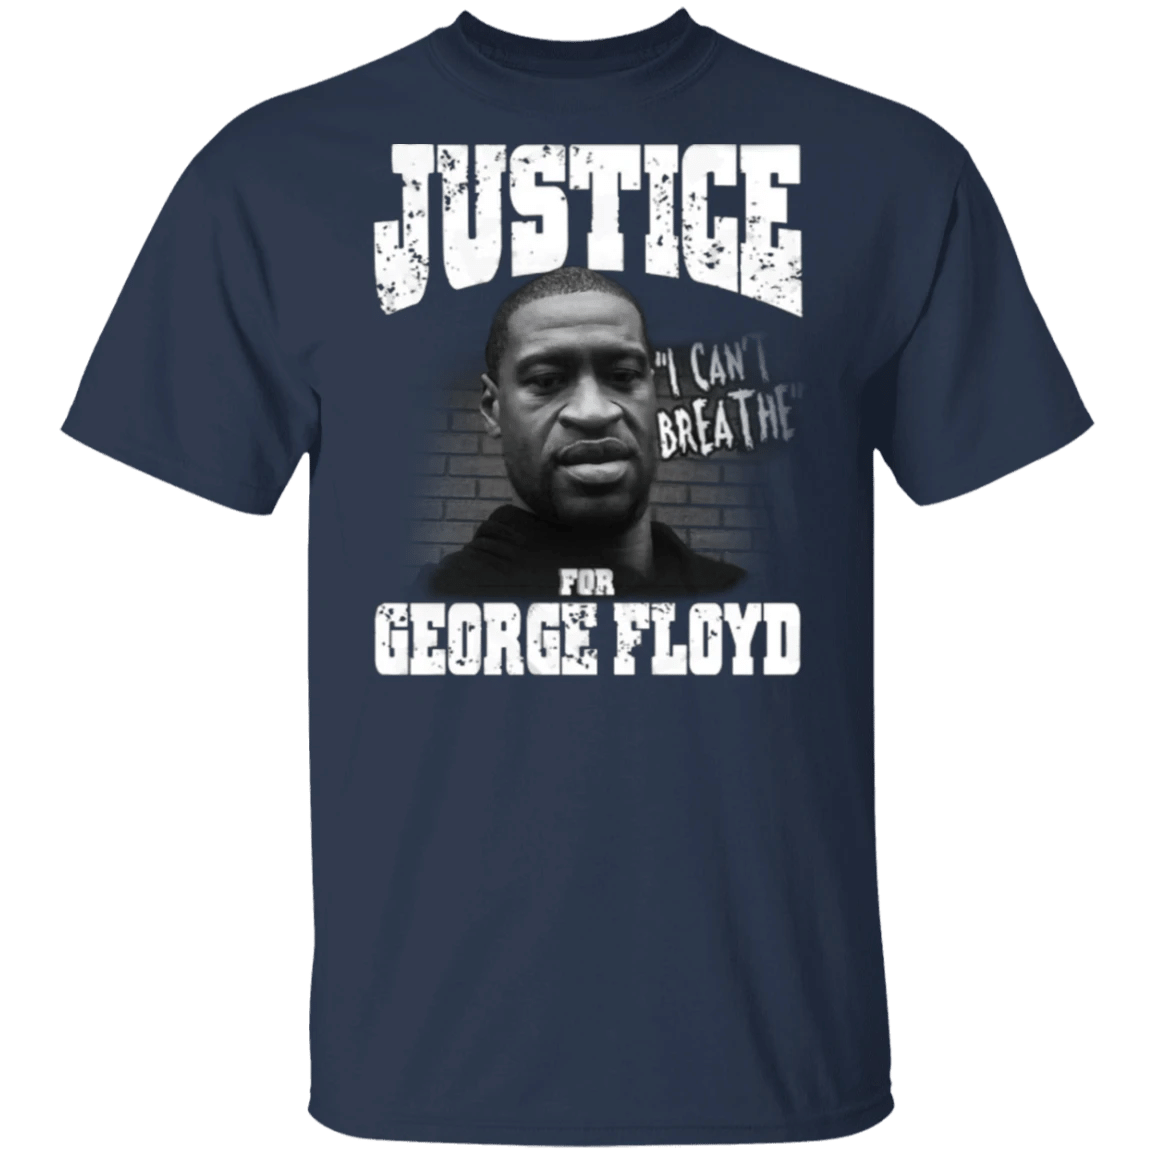 Justice For George Floyd T-Shirt I Can't Breathe Protest Shirts